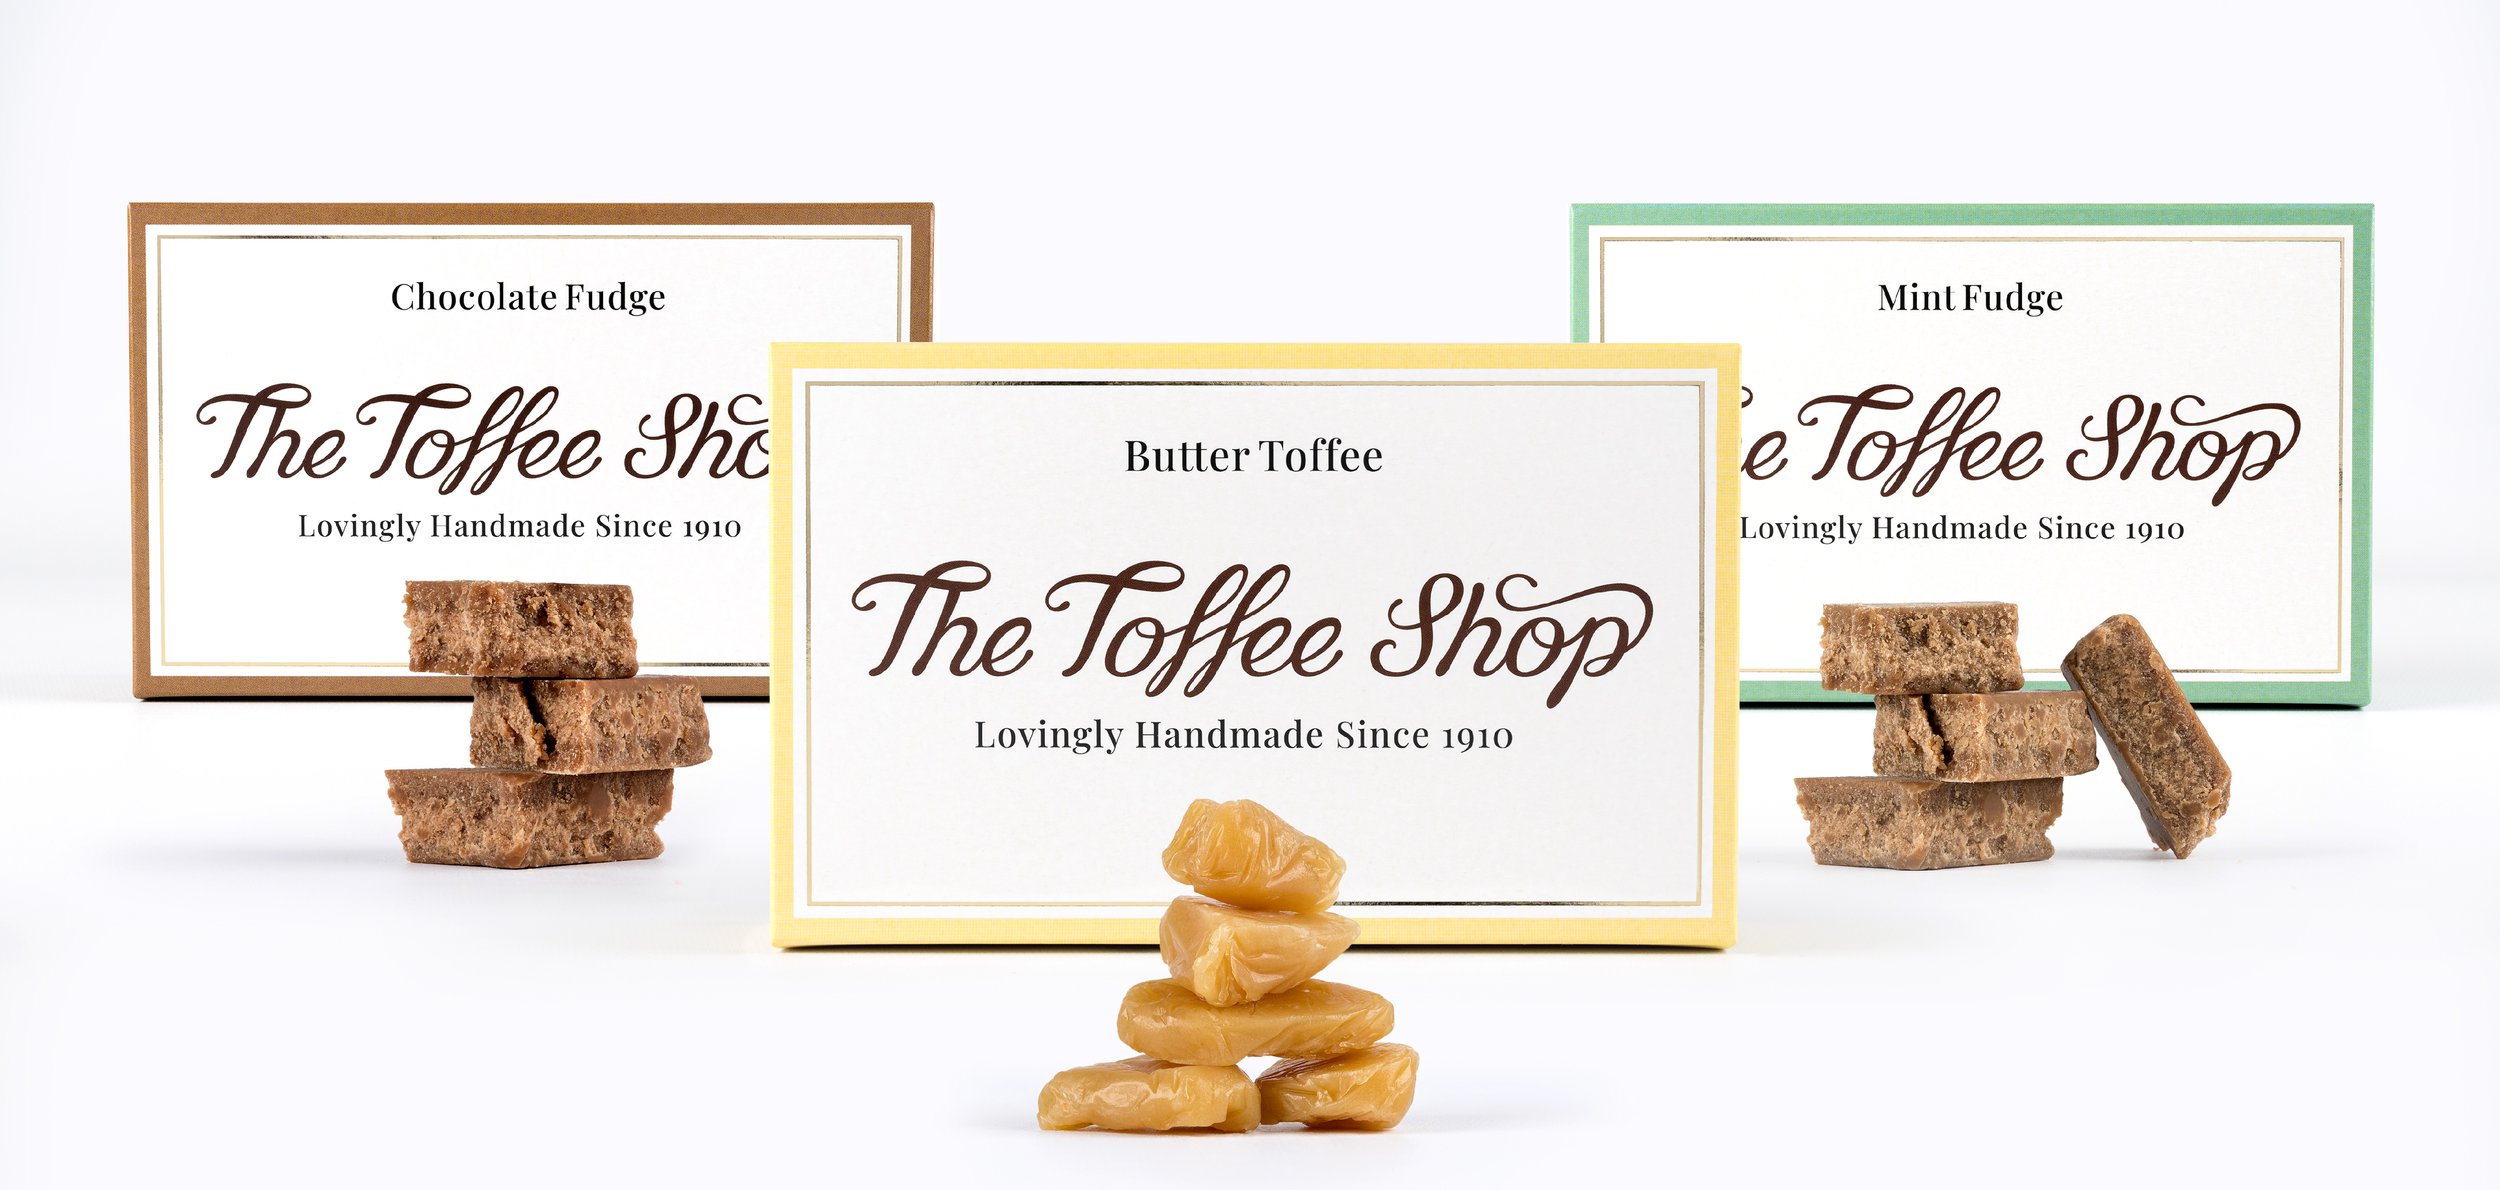 The Toffee Shop